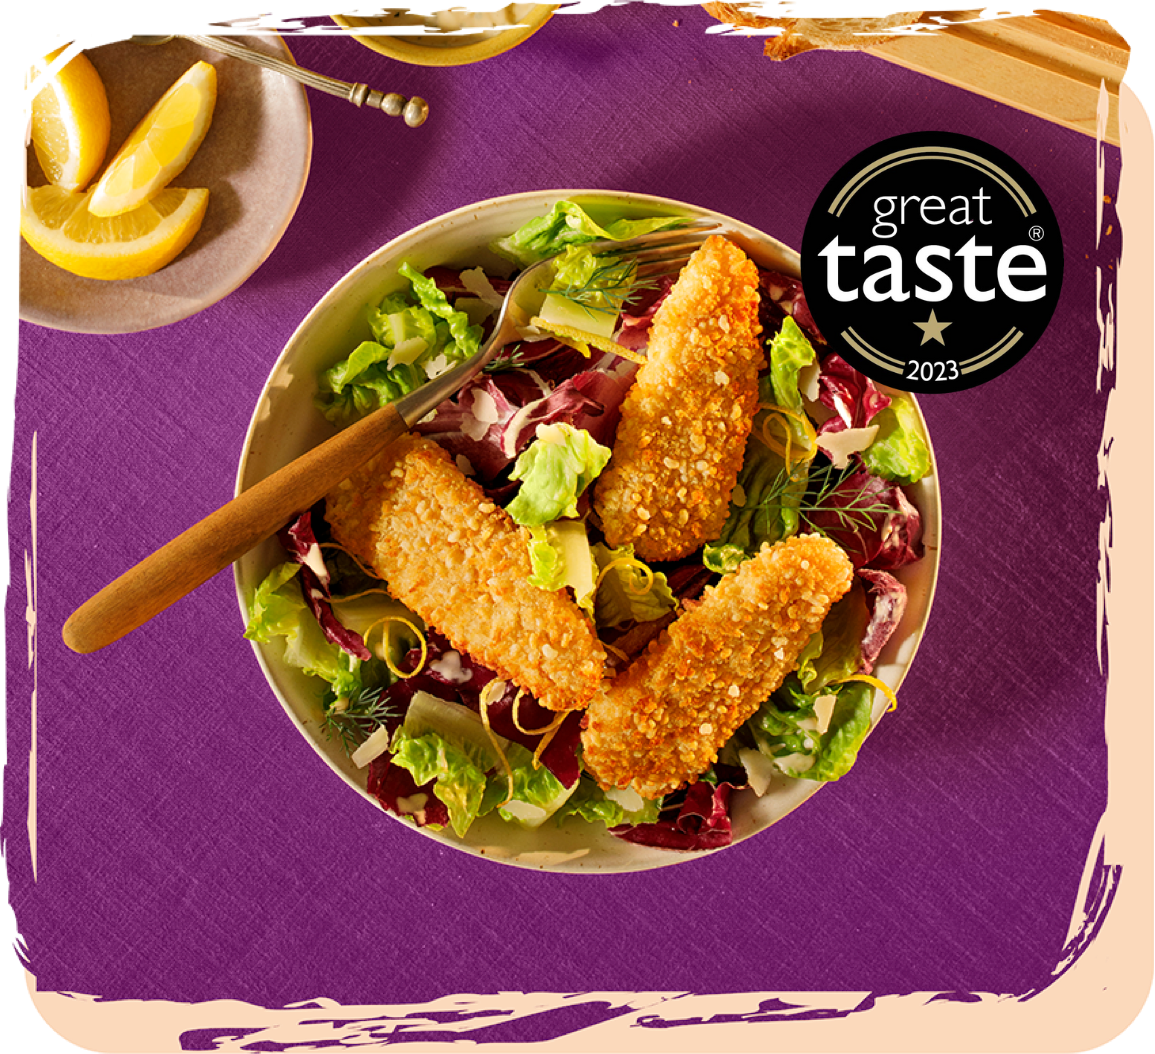 Top Lifestyle Shot of Valess Crunchy Tenders with Great Taste Award 2023 Icon